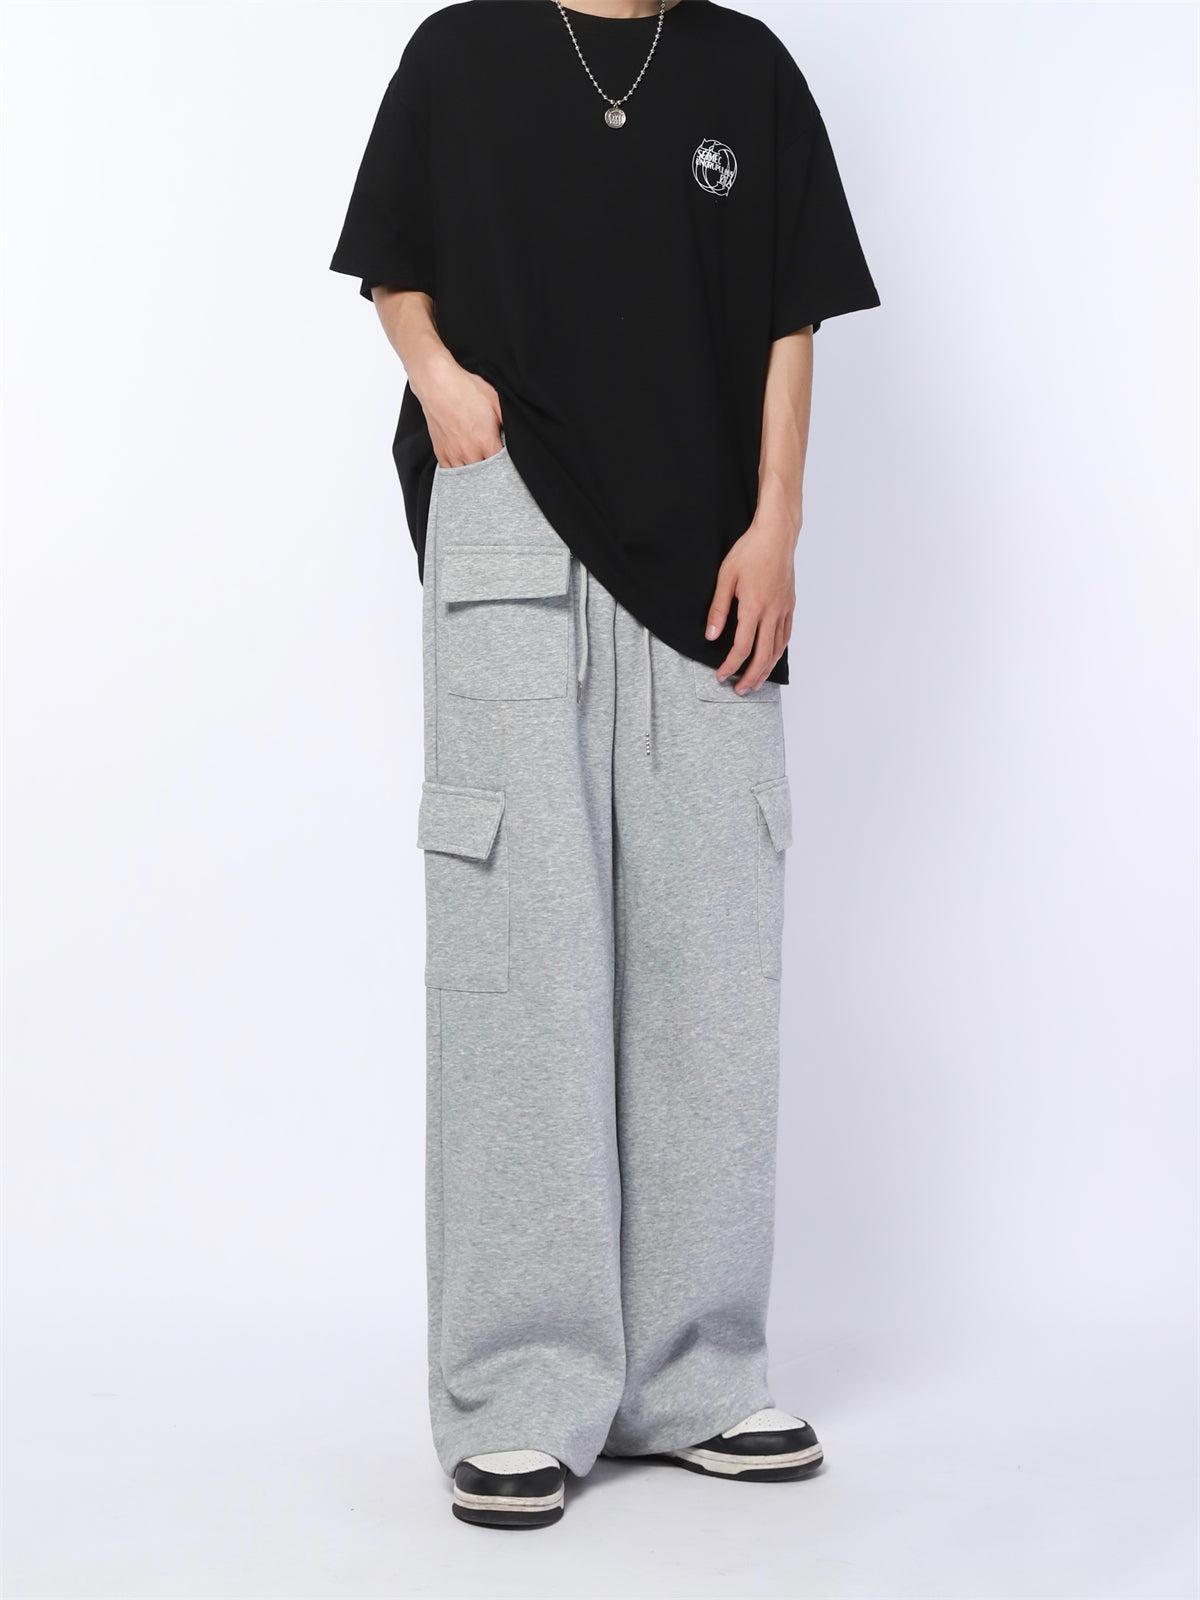 Solid Multi Pocket Loose Fit Sweatpants Korean Street Fashion Pants By Made Extreme Shop Online at OH Vault